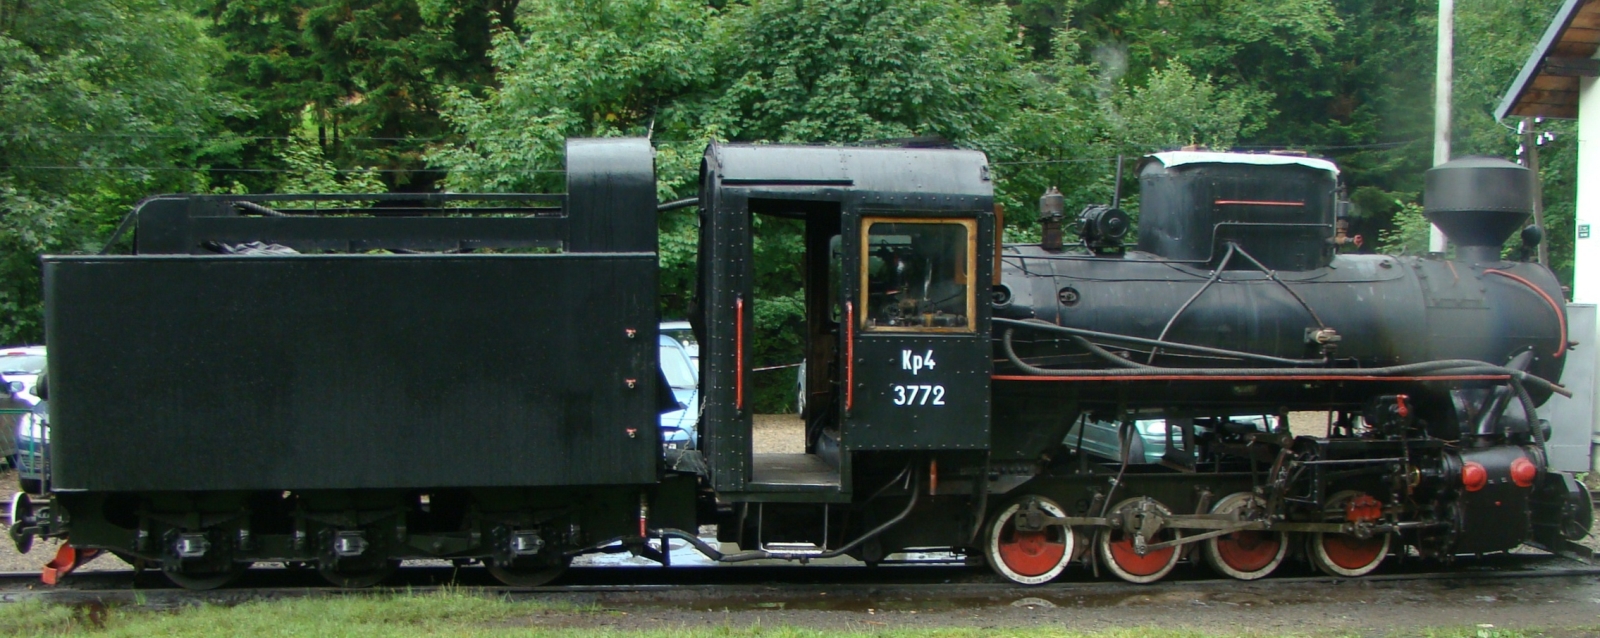 КП-4 No. 3772 of the Bieszczady forest railway in July 2018 at Majdan station